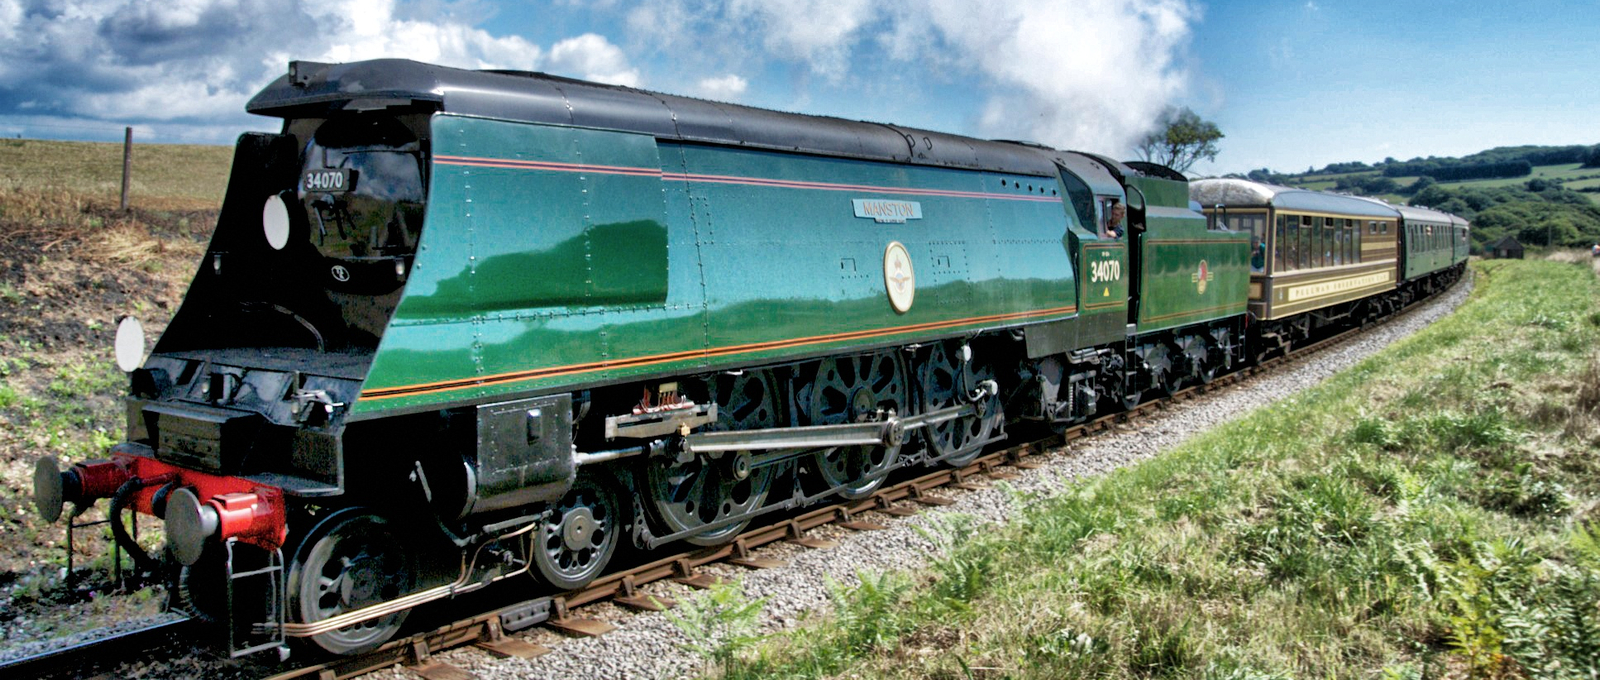 No. 34070 "Manston" at the "Grand Steam Gala and Vintage Transport Rally" in September 2013 in Swanage